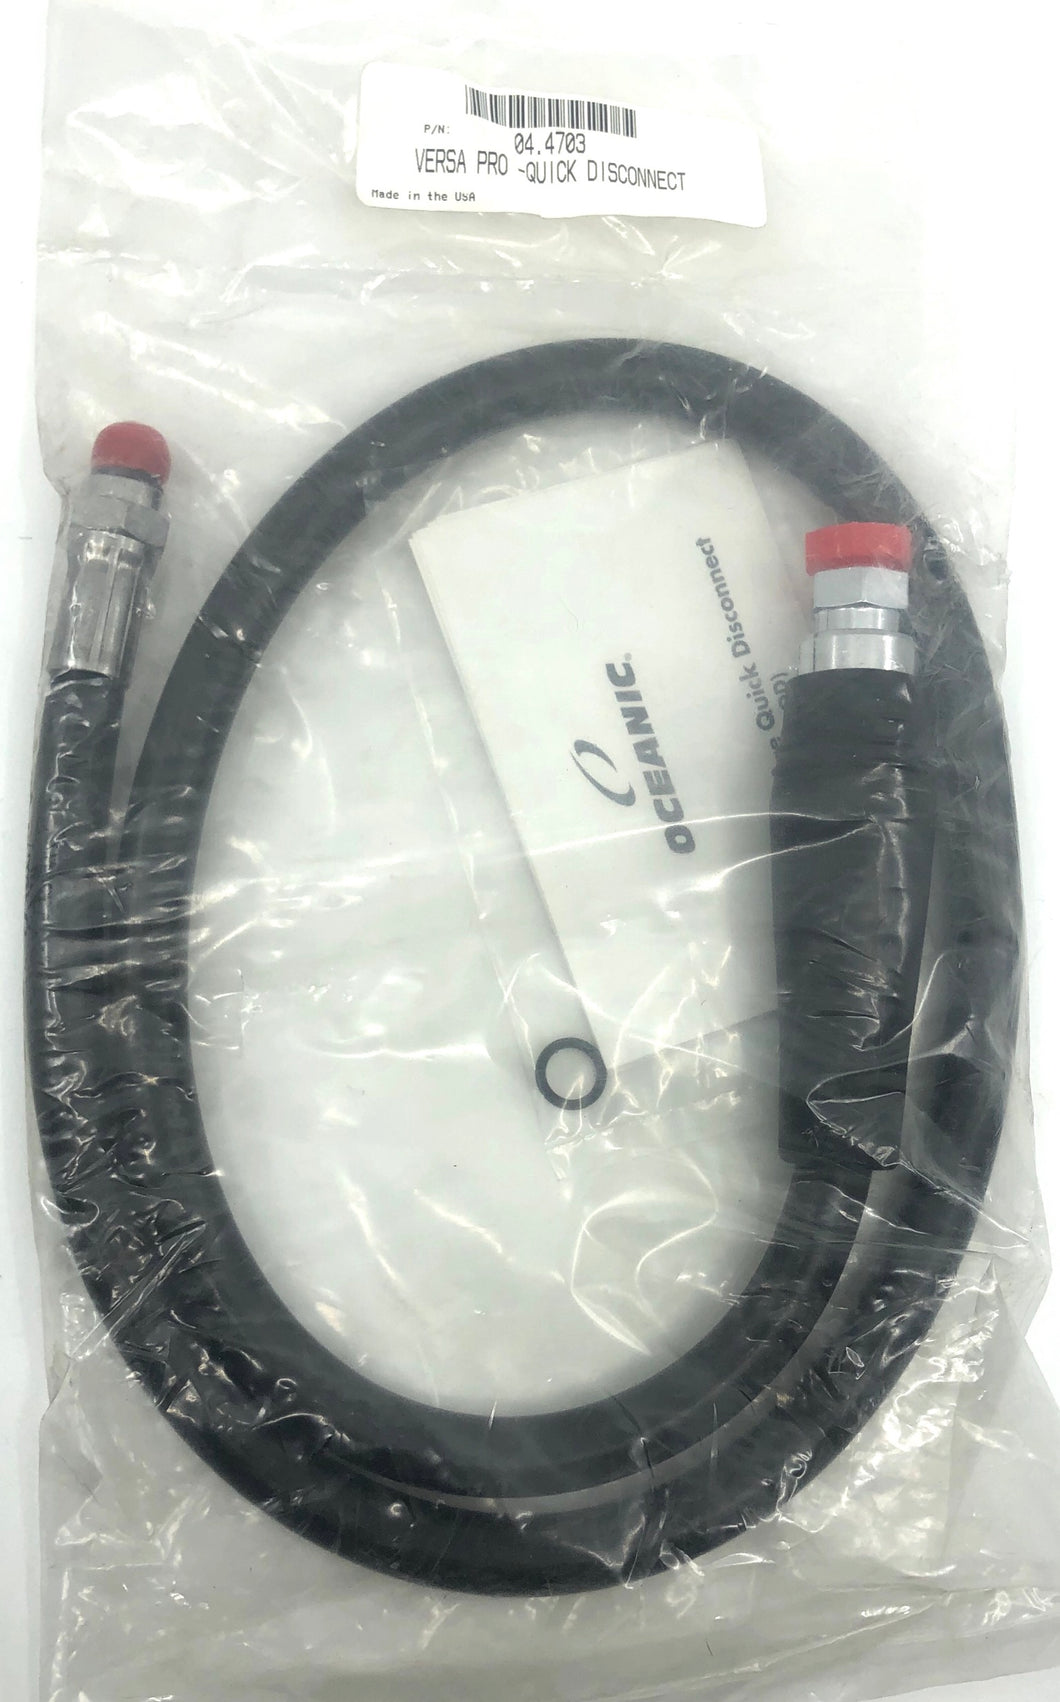 Oceanic High Pressure Hose for a Versa Pro with Quick Disconnect 04.4703